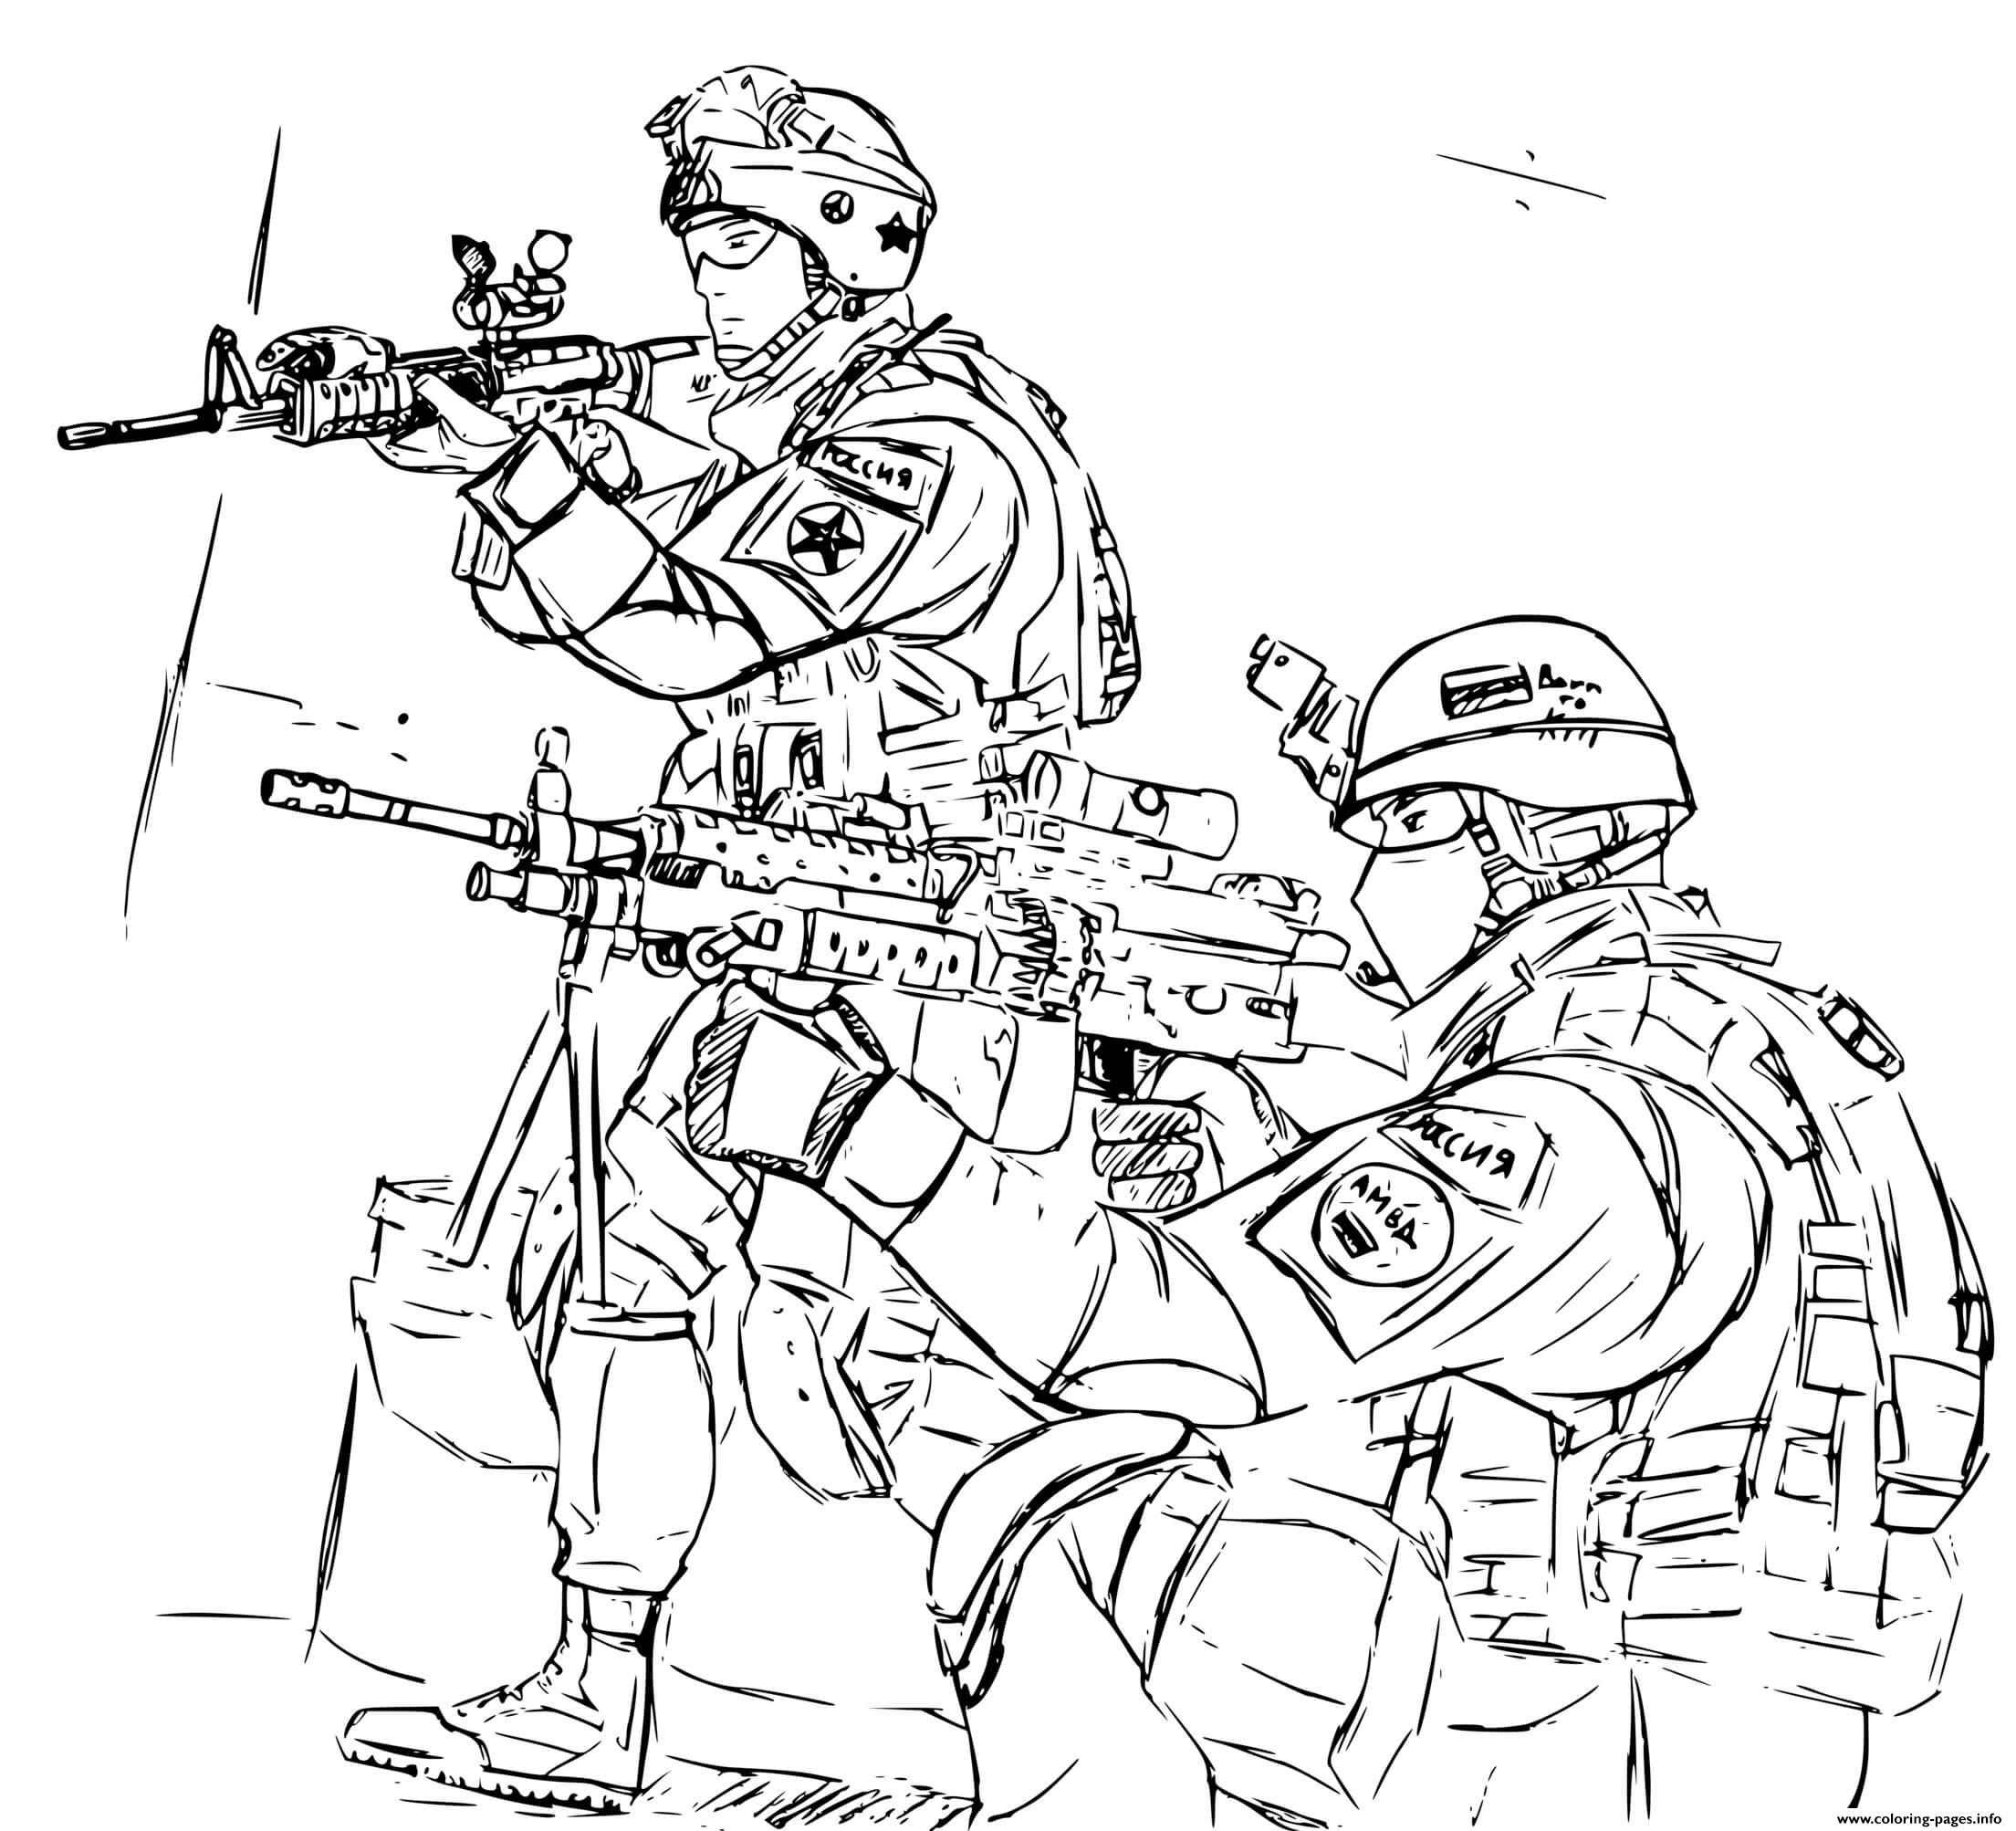 World War 2 Coloring Book : Coloring War Military Soldier Army Wwii ...